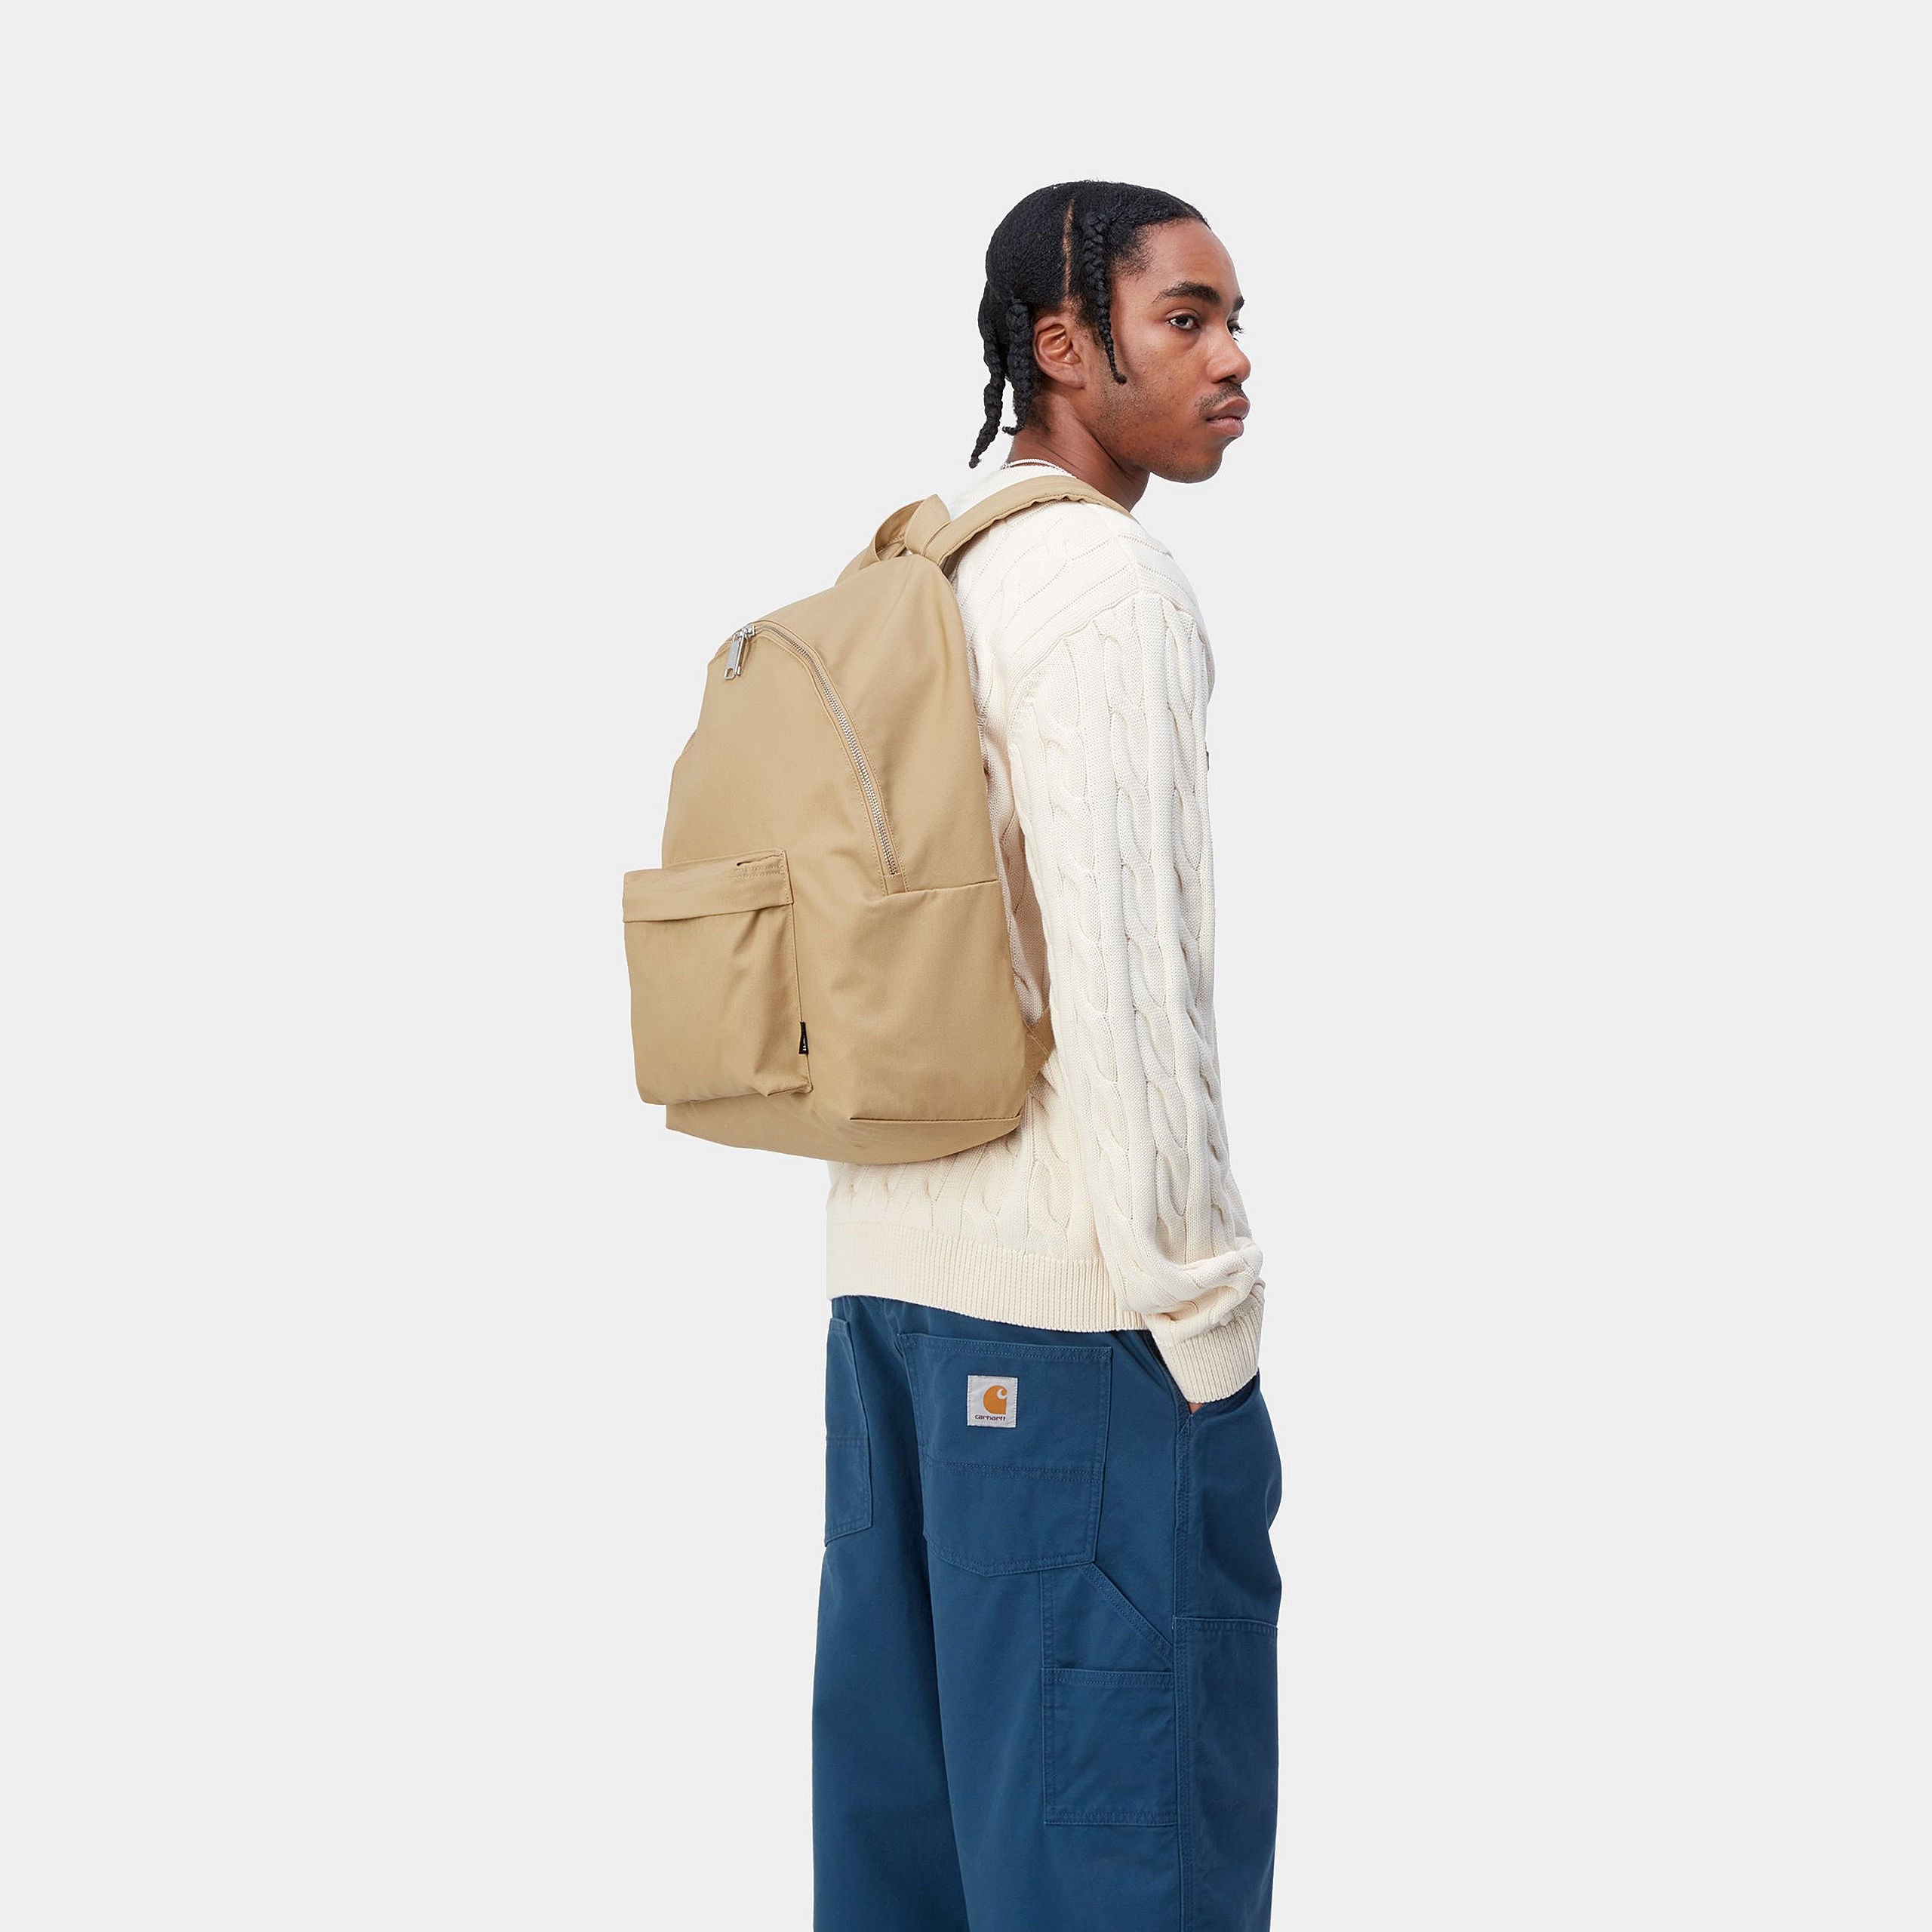 NEWHAVEN BACKPACK - Sable